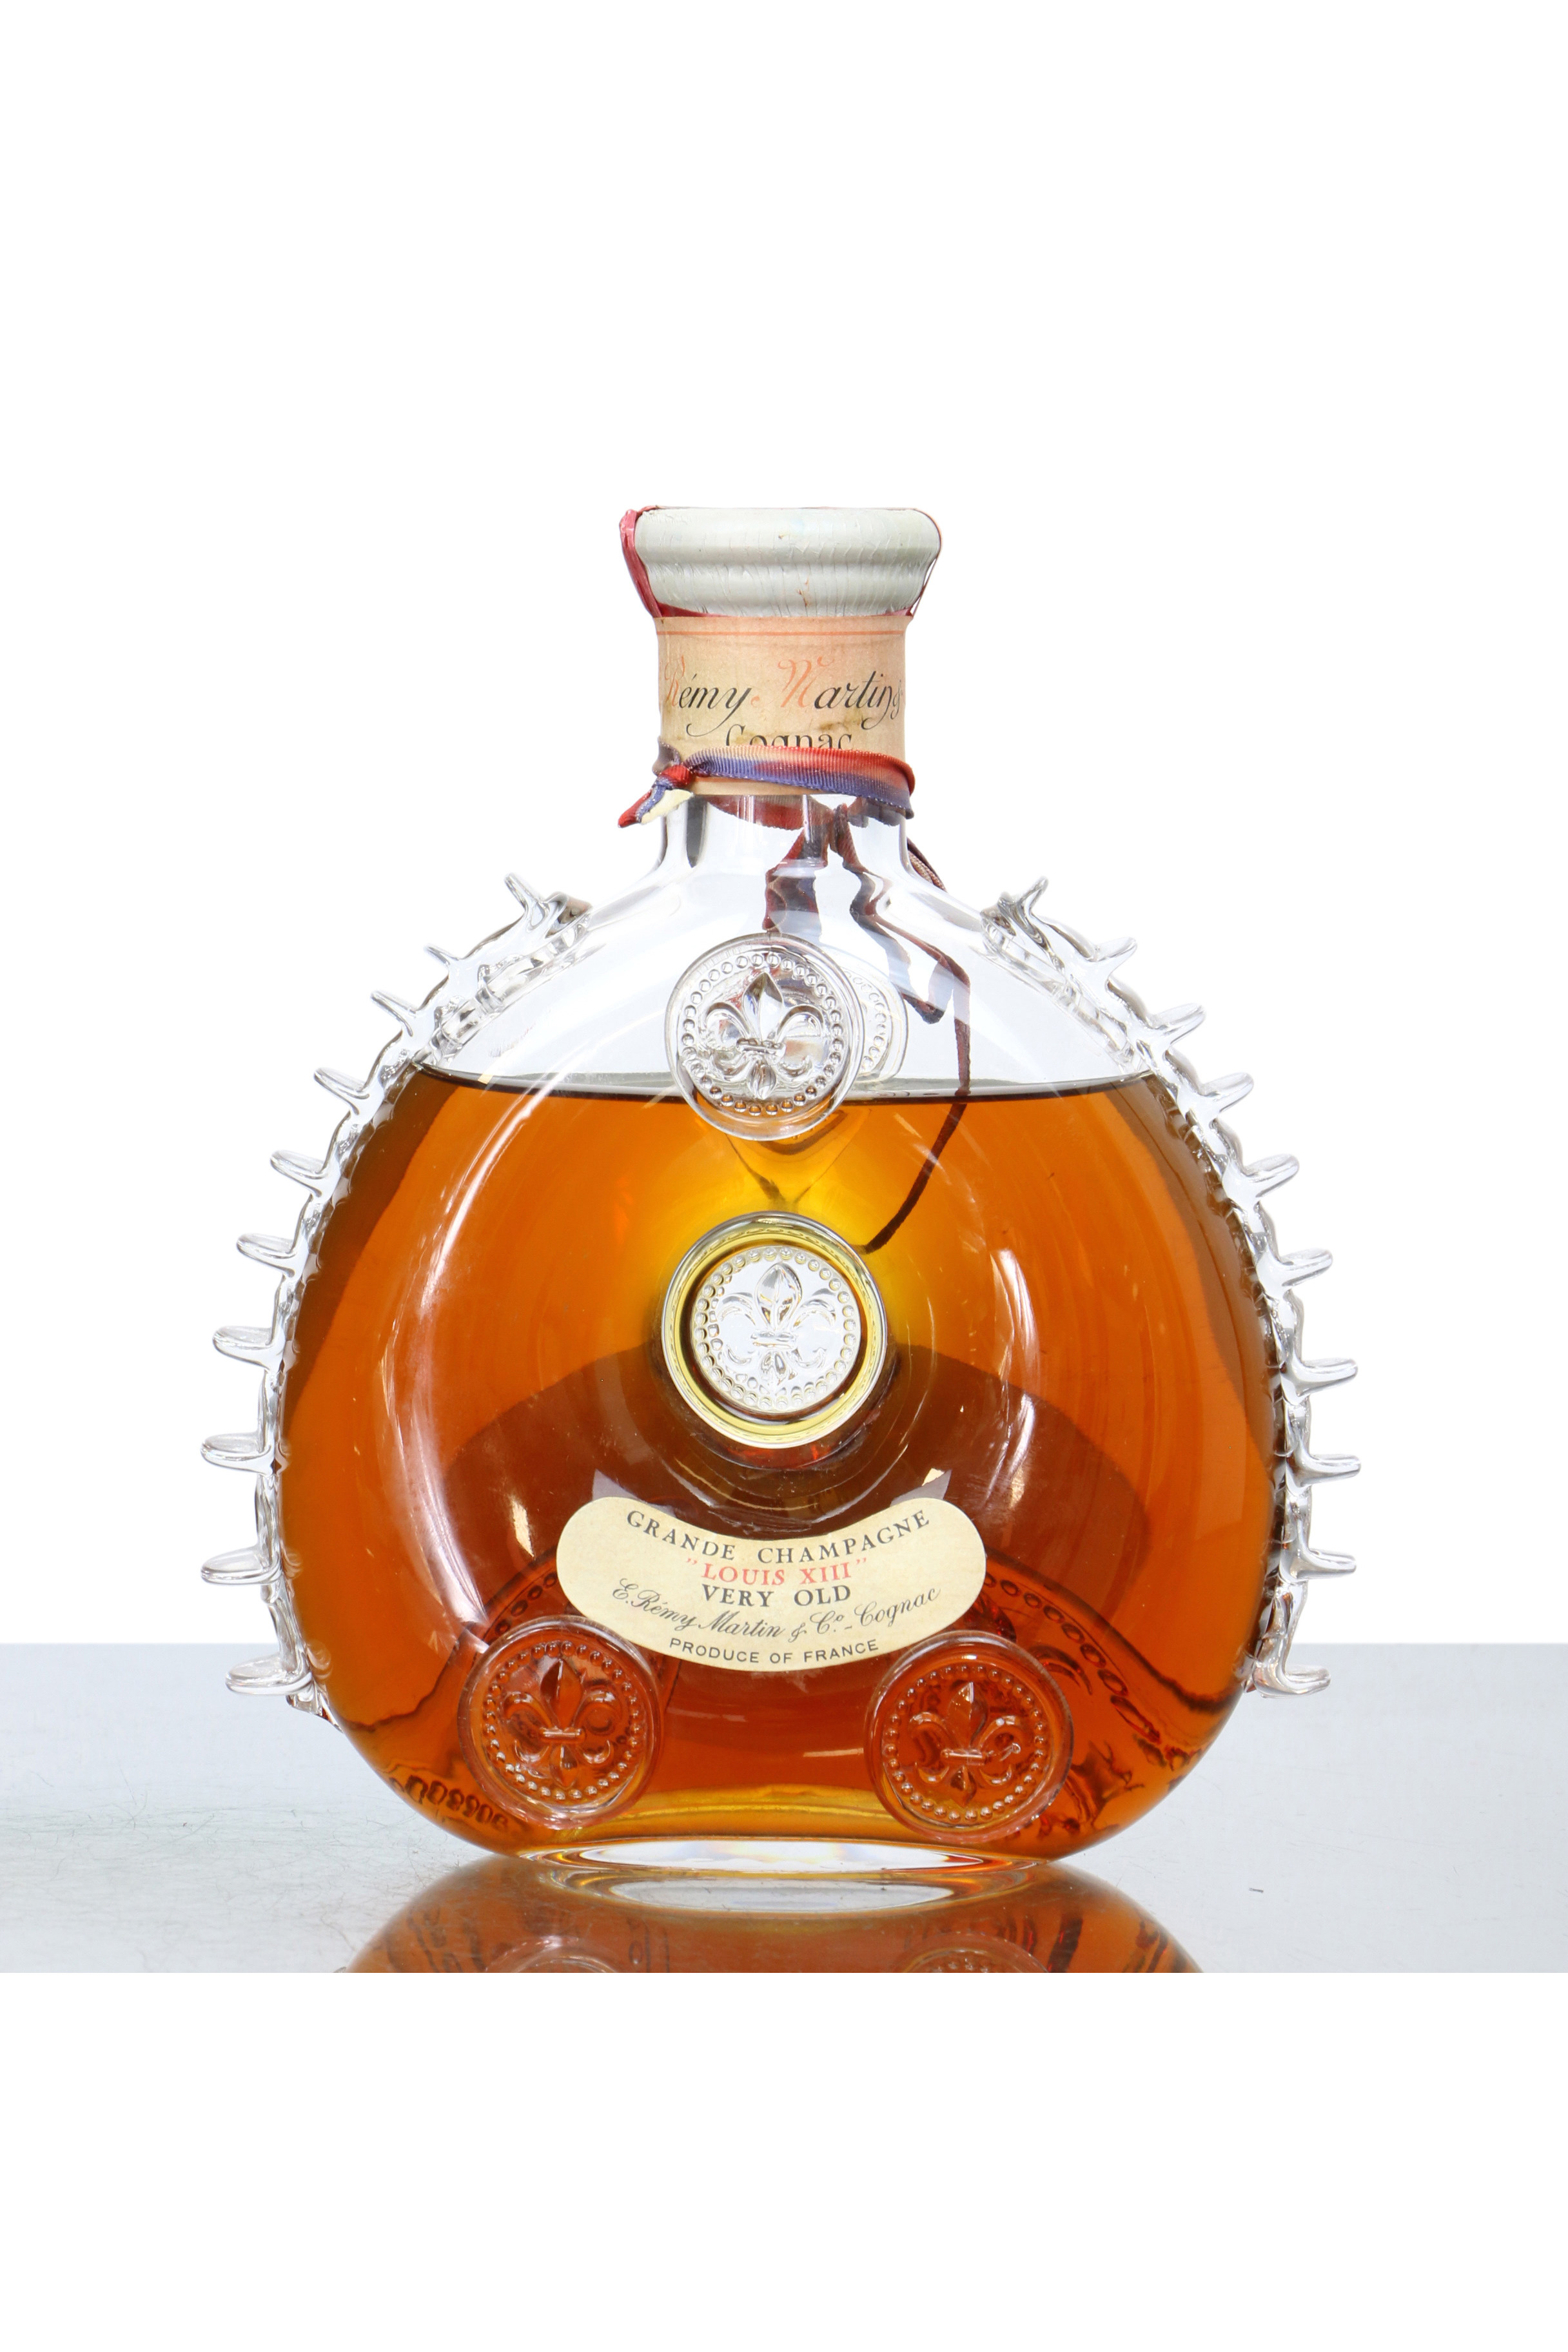 Sold at Auction: Baccarat Remy Martin Louis XIII Cognac Decanter Bottle